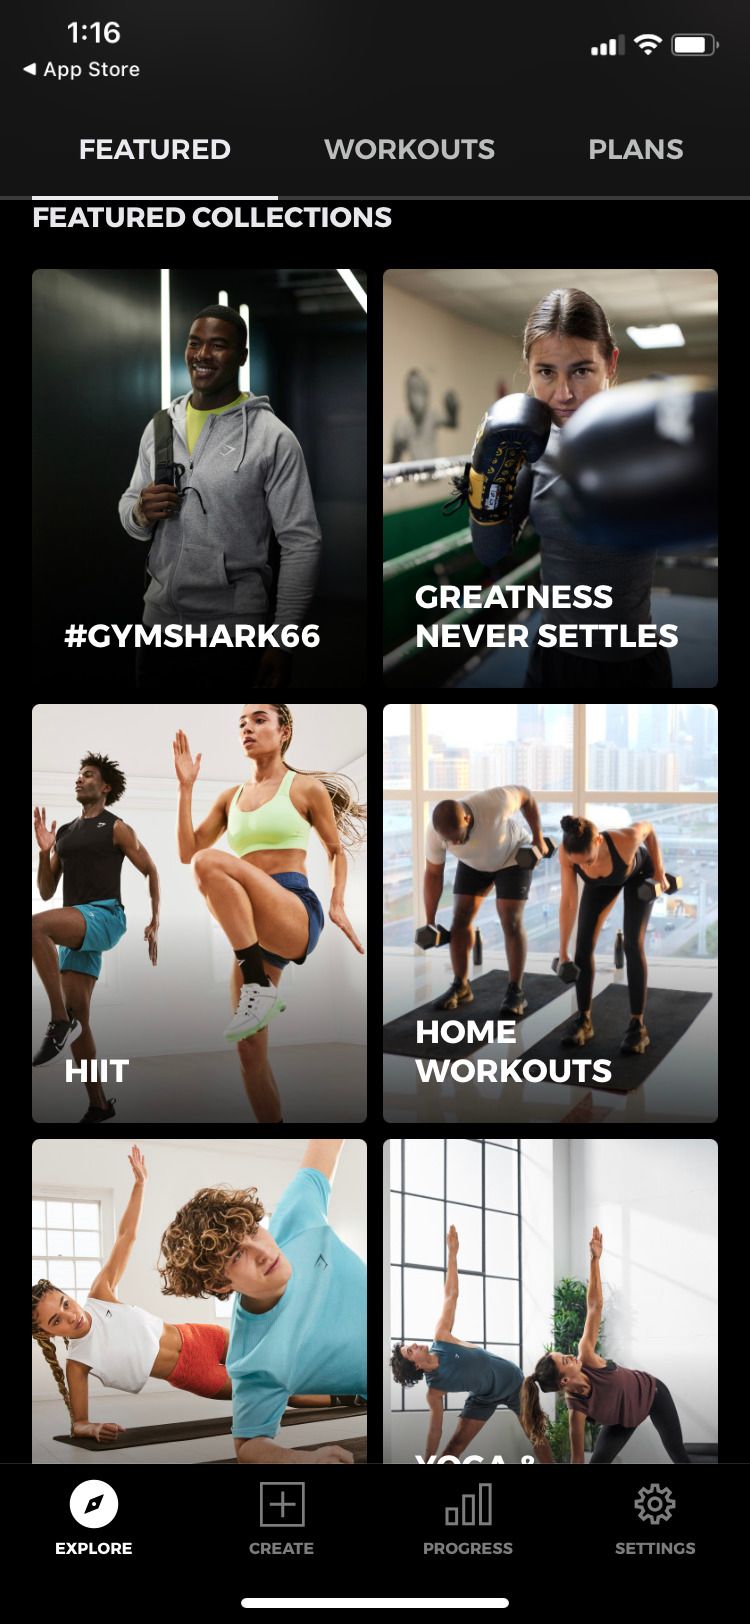 Gymshark app featured workouts